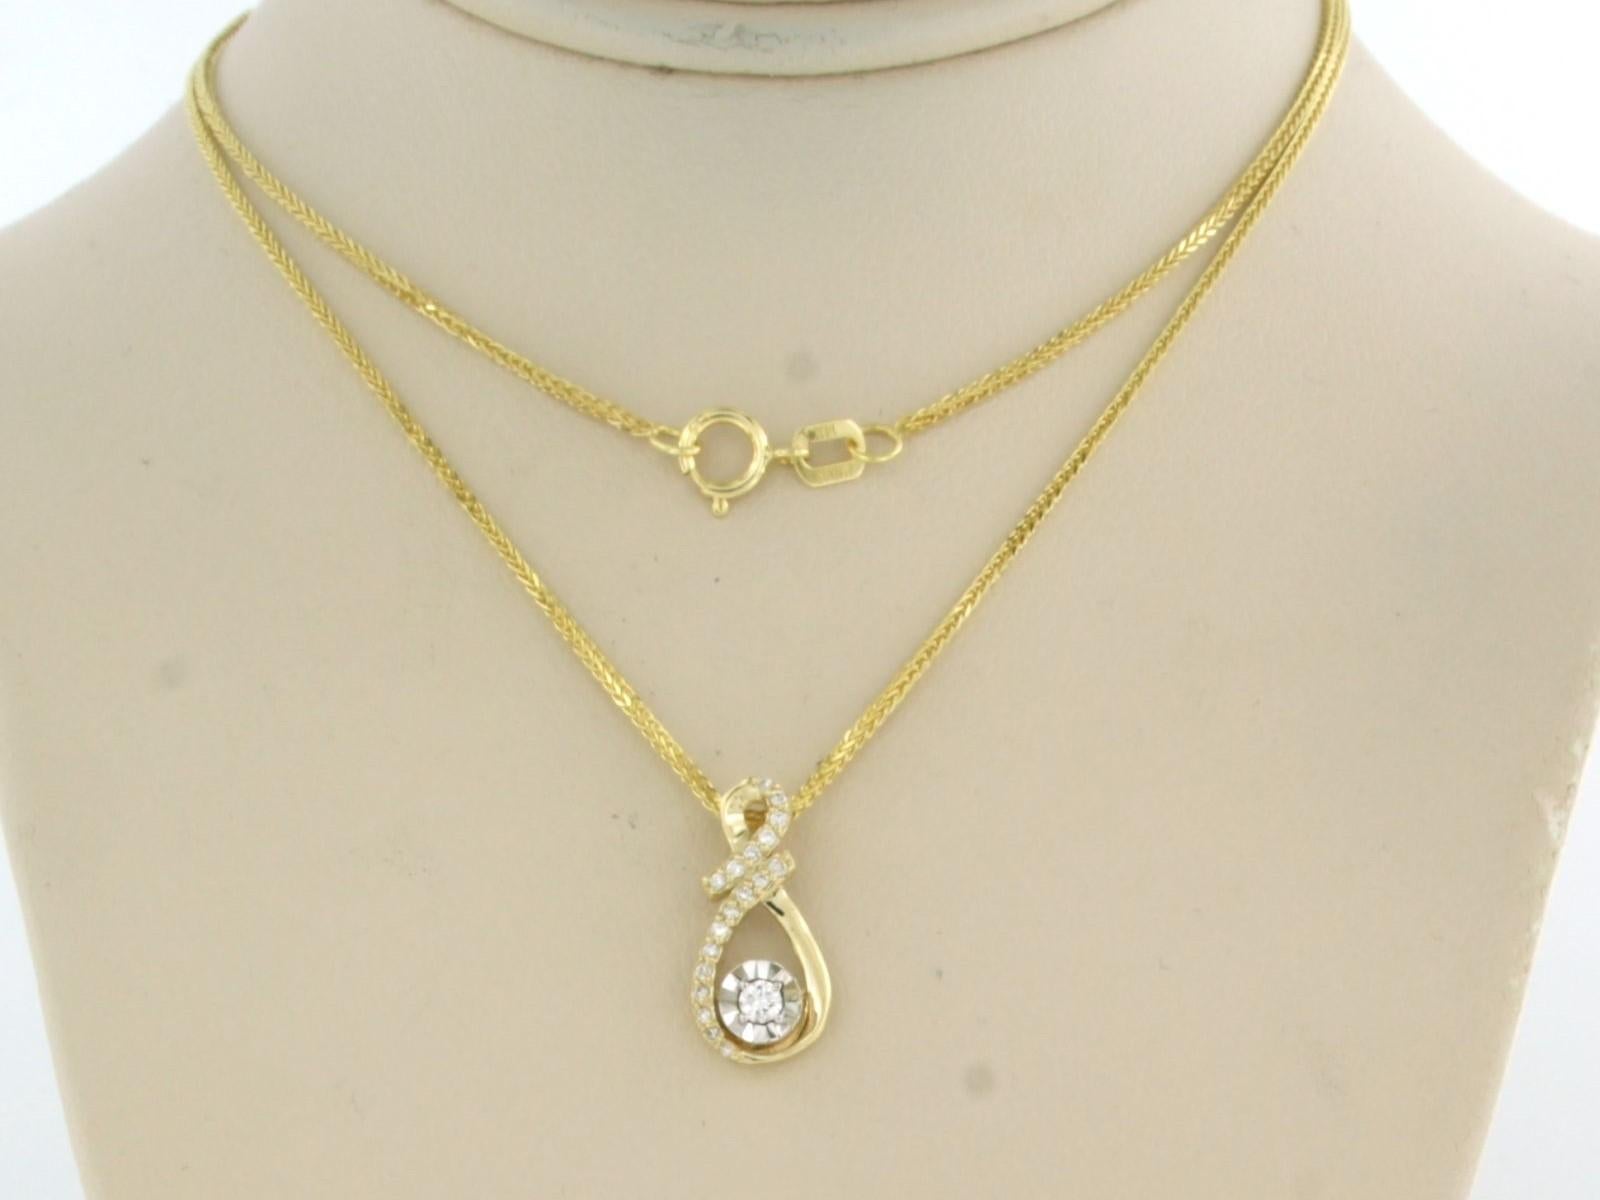 14k yellow gold necklace with bicolour gold pendant set with brilliant cut diamonds up to . 0.10ct - F/G - VS/SI - 45 cm long

detailed description

necklace is 45 cm long and 0.7 mm wide

size of the pendant is approximately 1.5 cm high by 7.5 mm